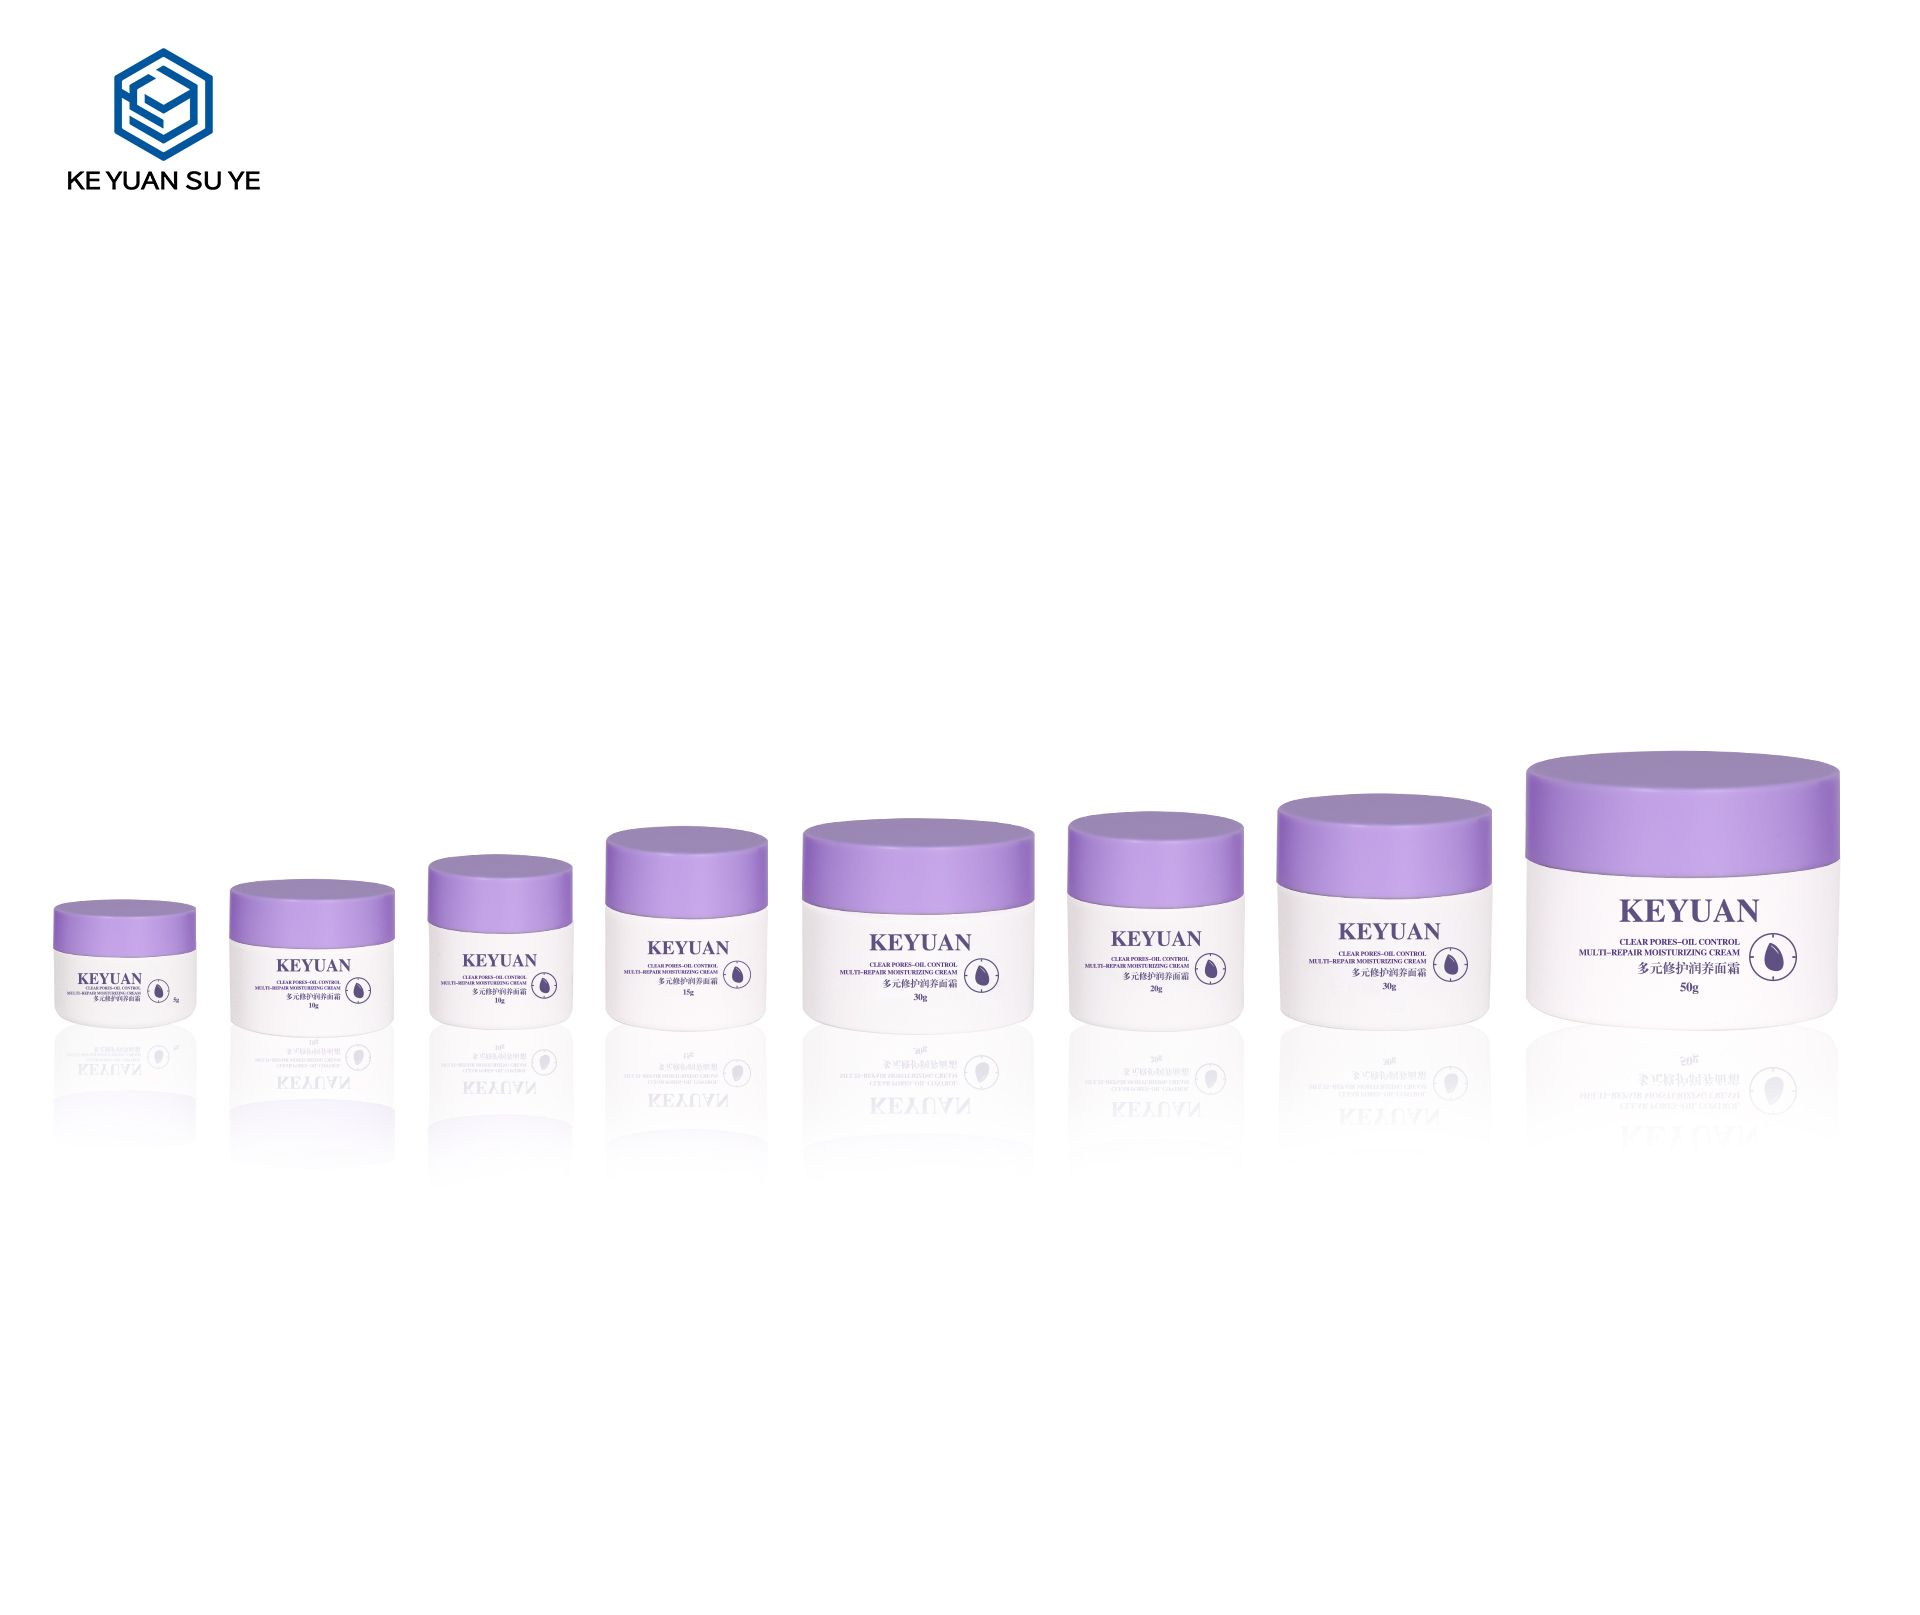 KY052 8PJ White Small Capacity Plastic Face Cream Jar Cosmetics Skin Care Container Empty Face Cream Jar with Purple Lid